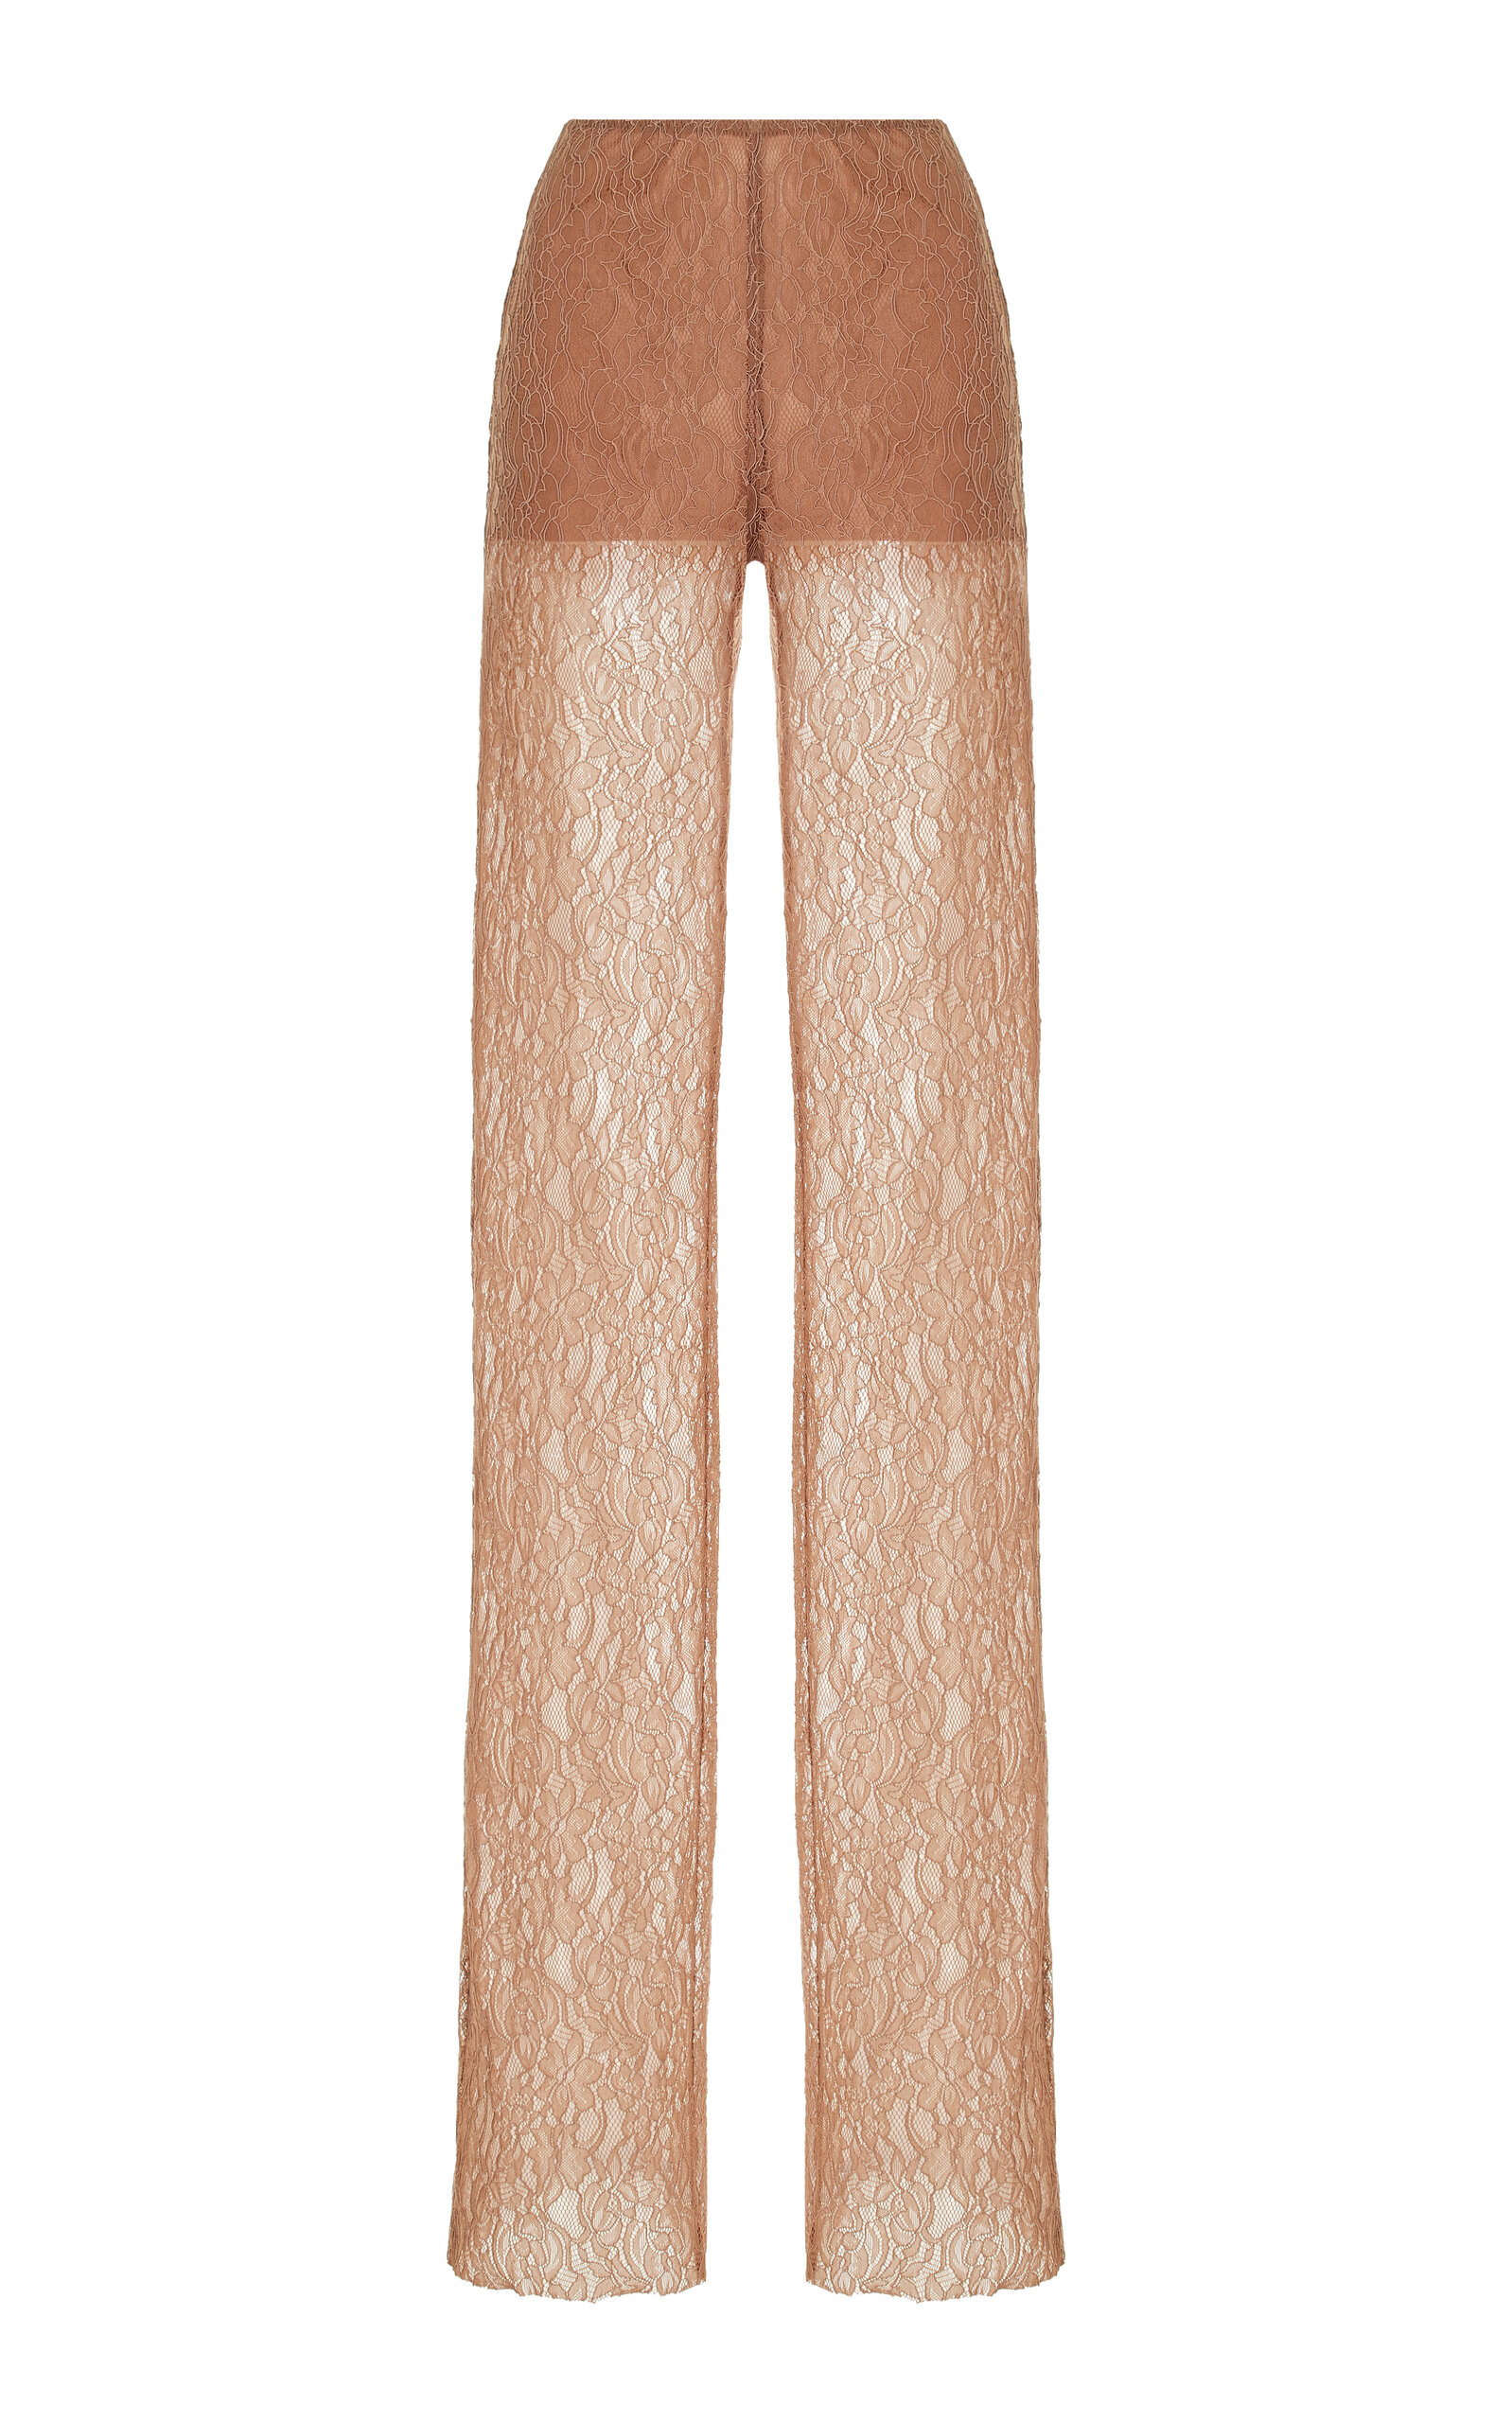 Flared Stretch Lace Pants